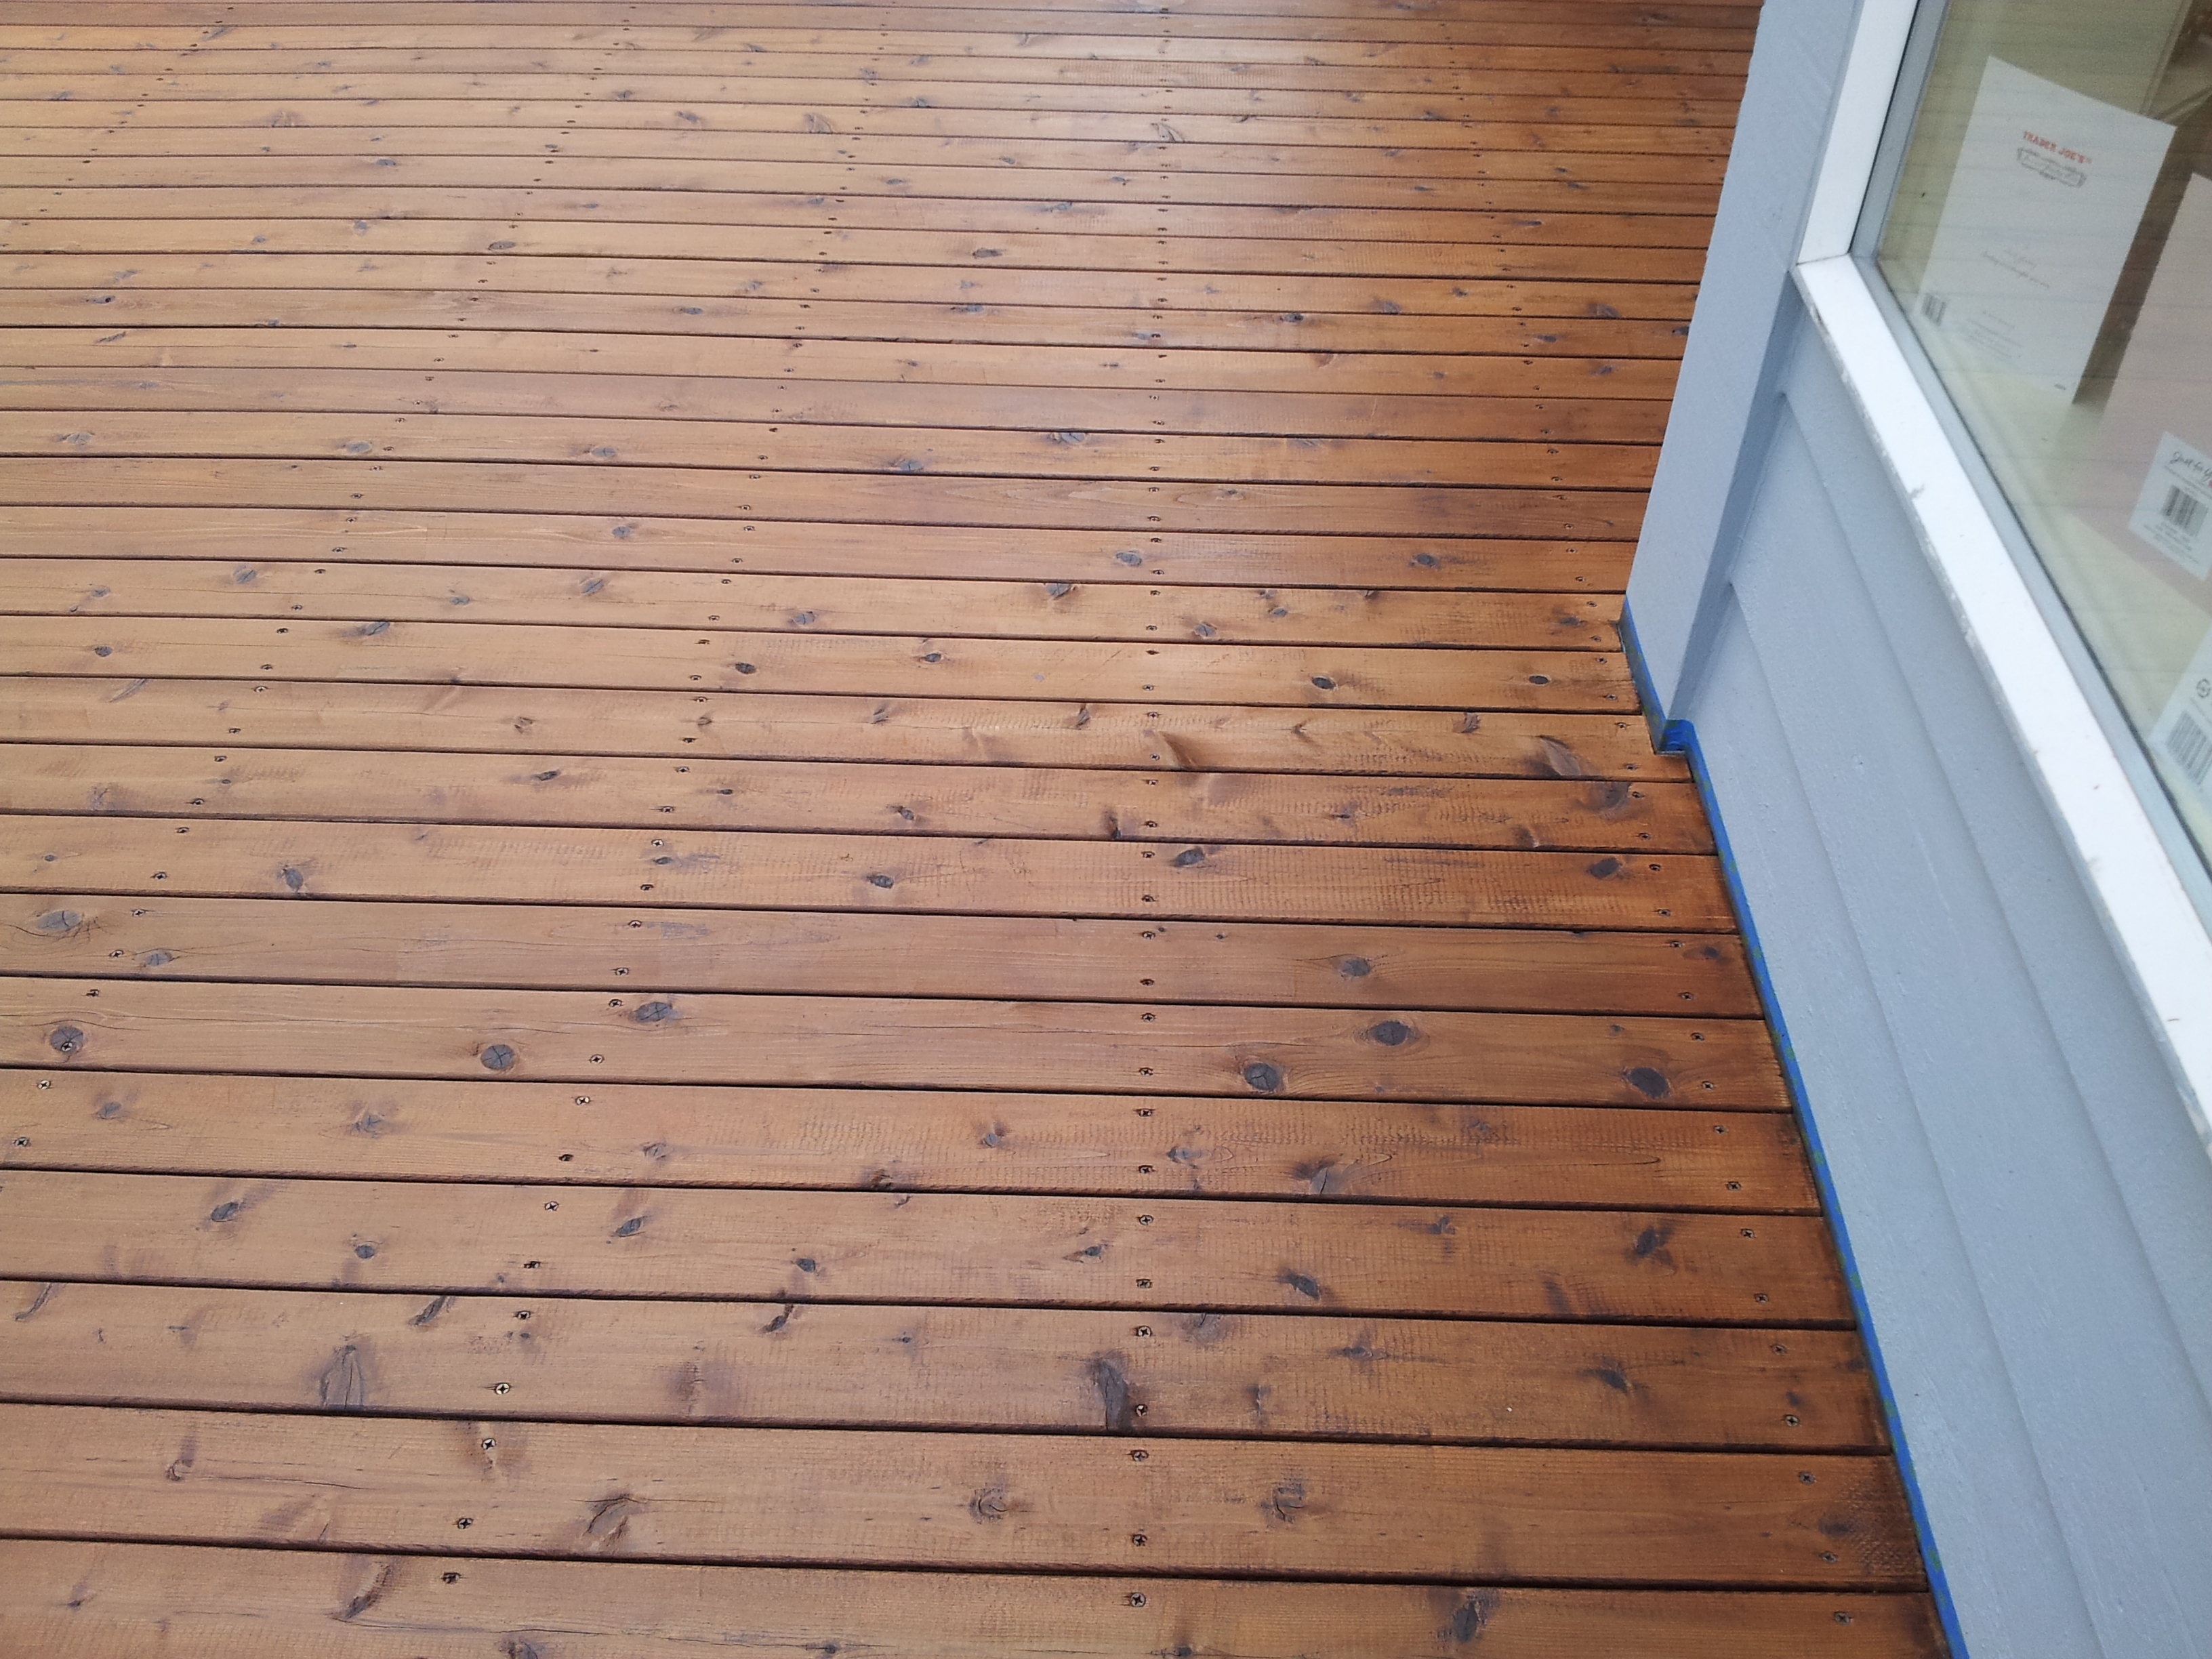 Oil Based Deck Stains 2019 Best Deck Stain Reviews Ratings pertaining to measurements 3264 X 2448